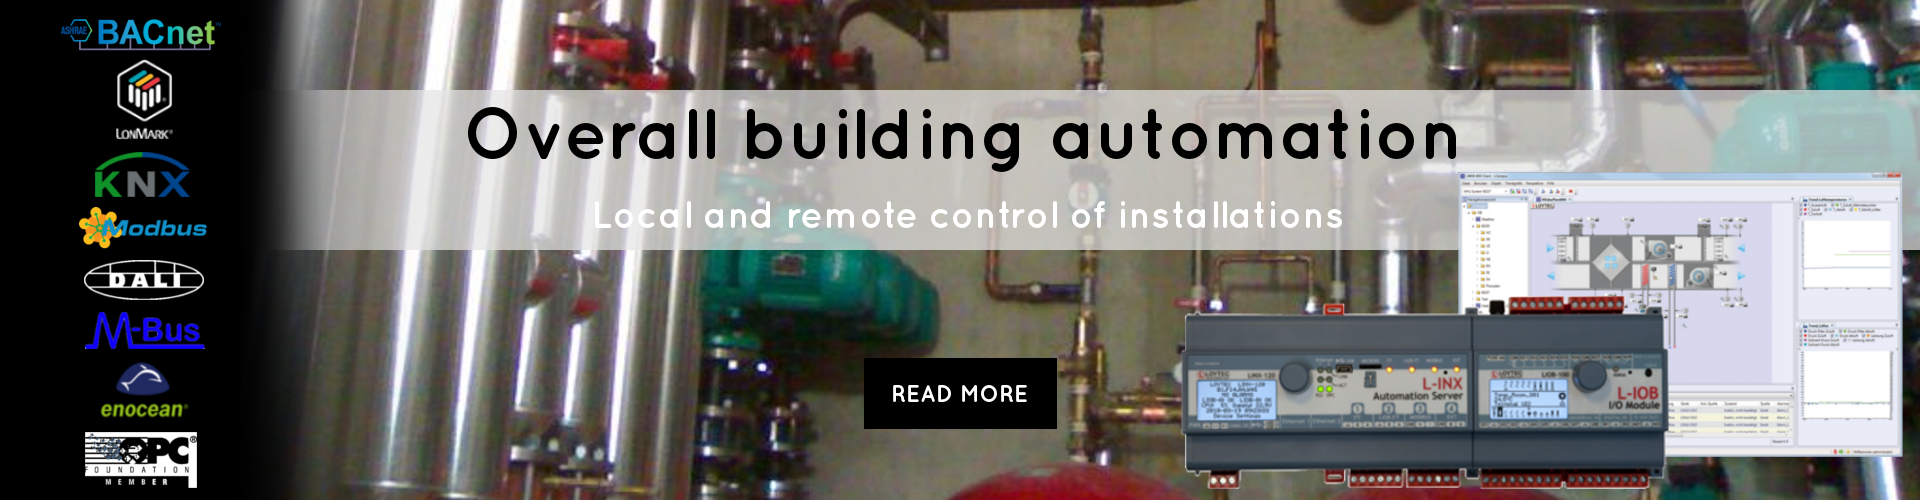 Overall building automation local and remote control of installations